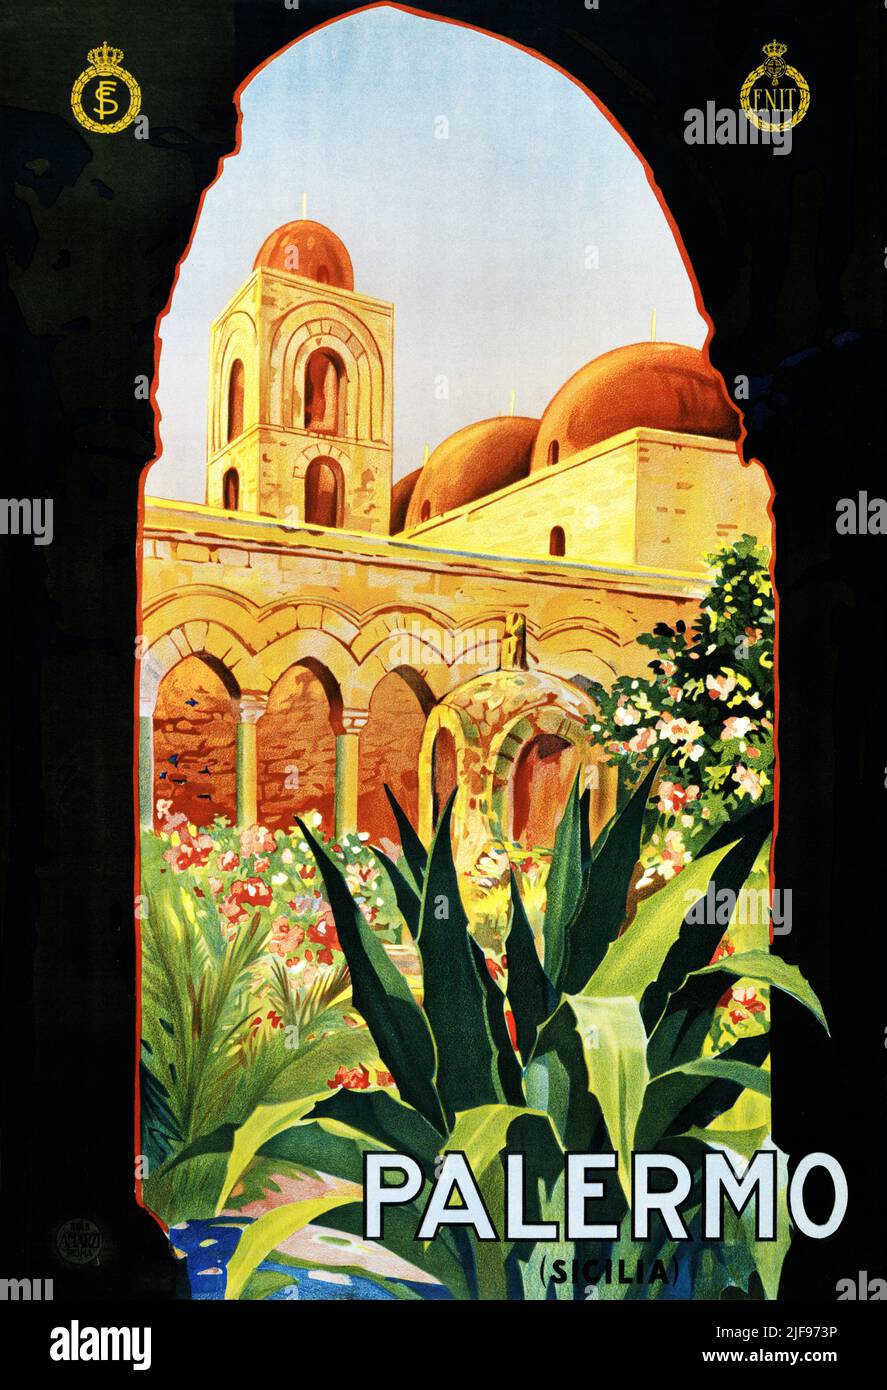 Palermo (Sicilia). Artist unknown. Poster published in the 1920s in Italy. Stock Photo